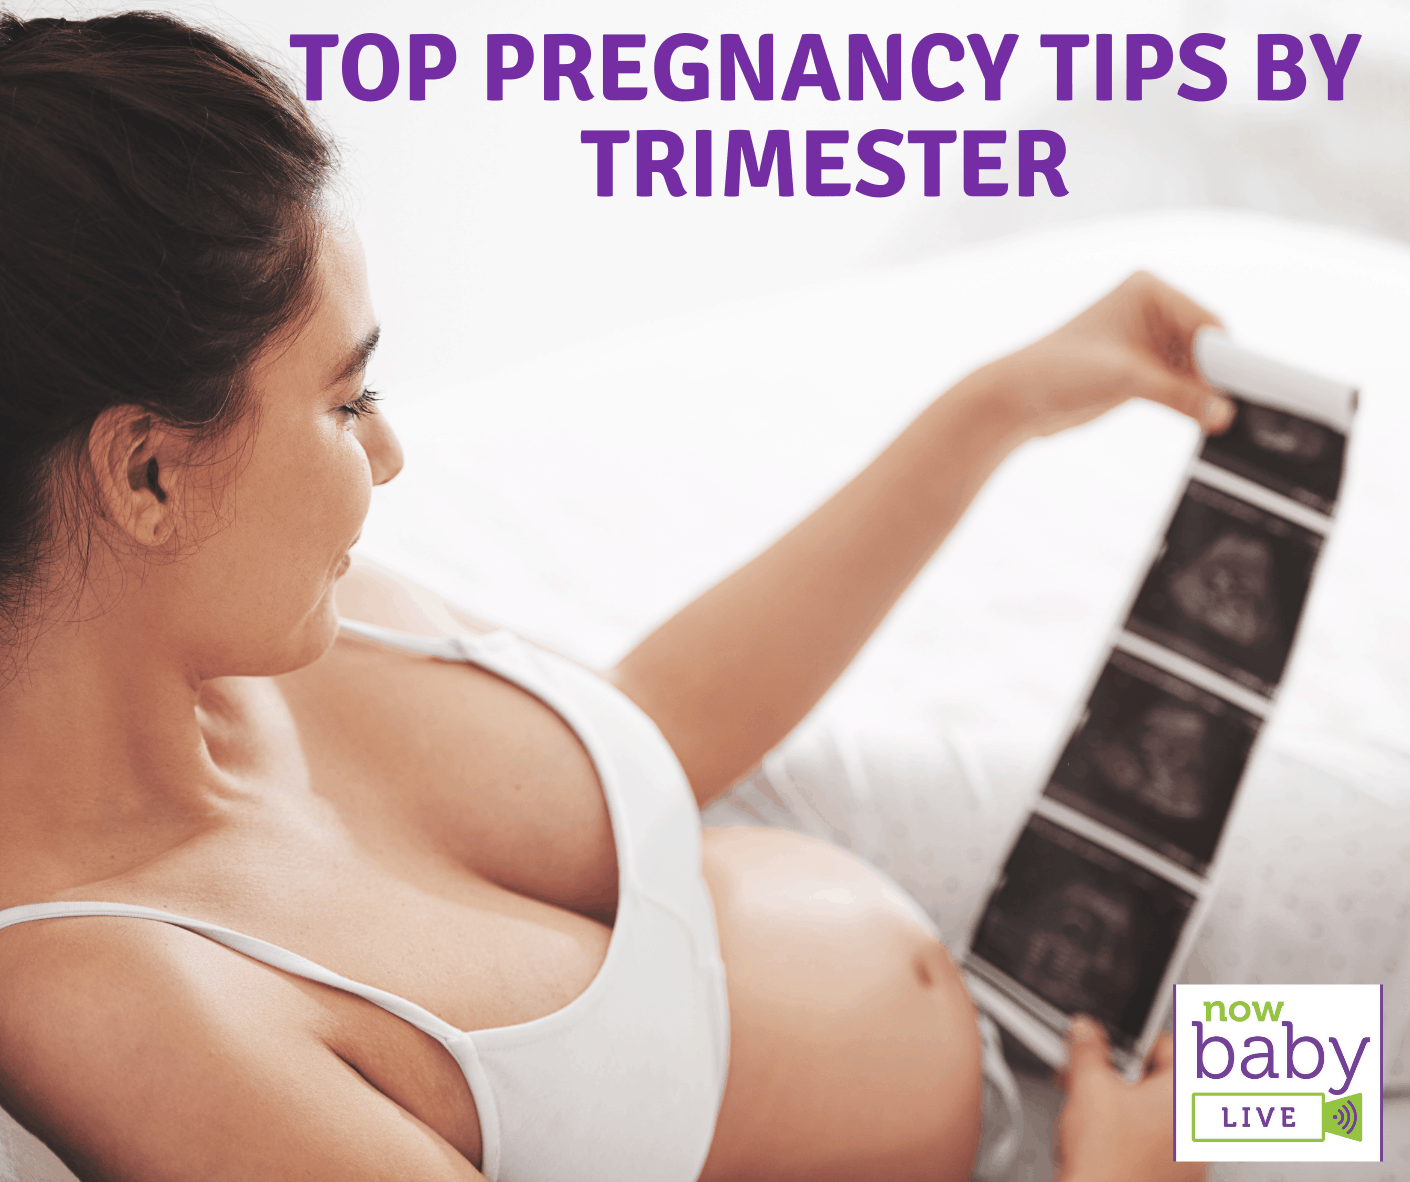 Top Pregnancy Tips by Trimester